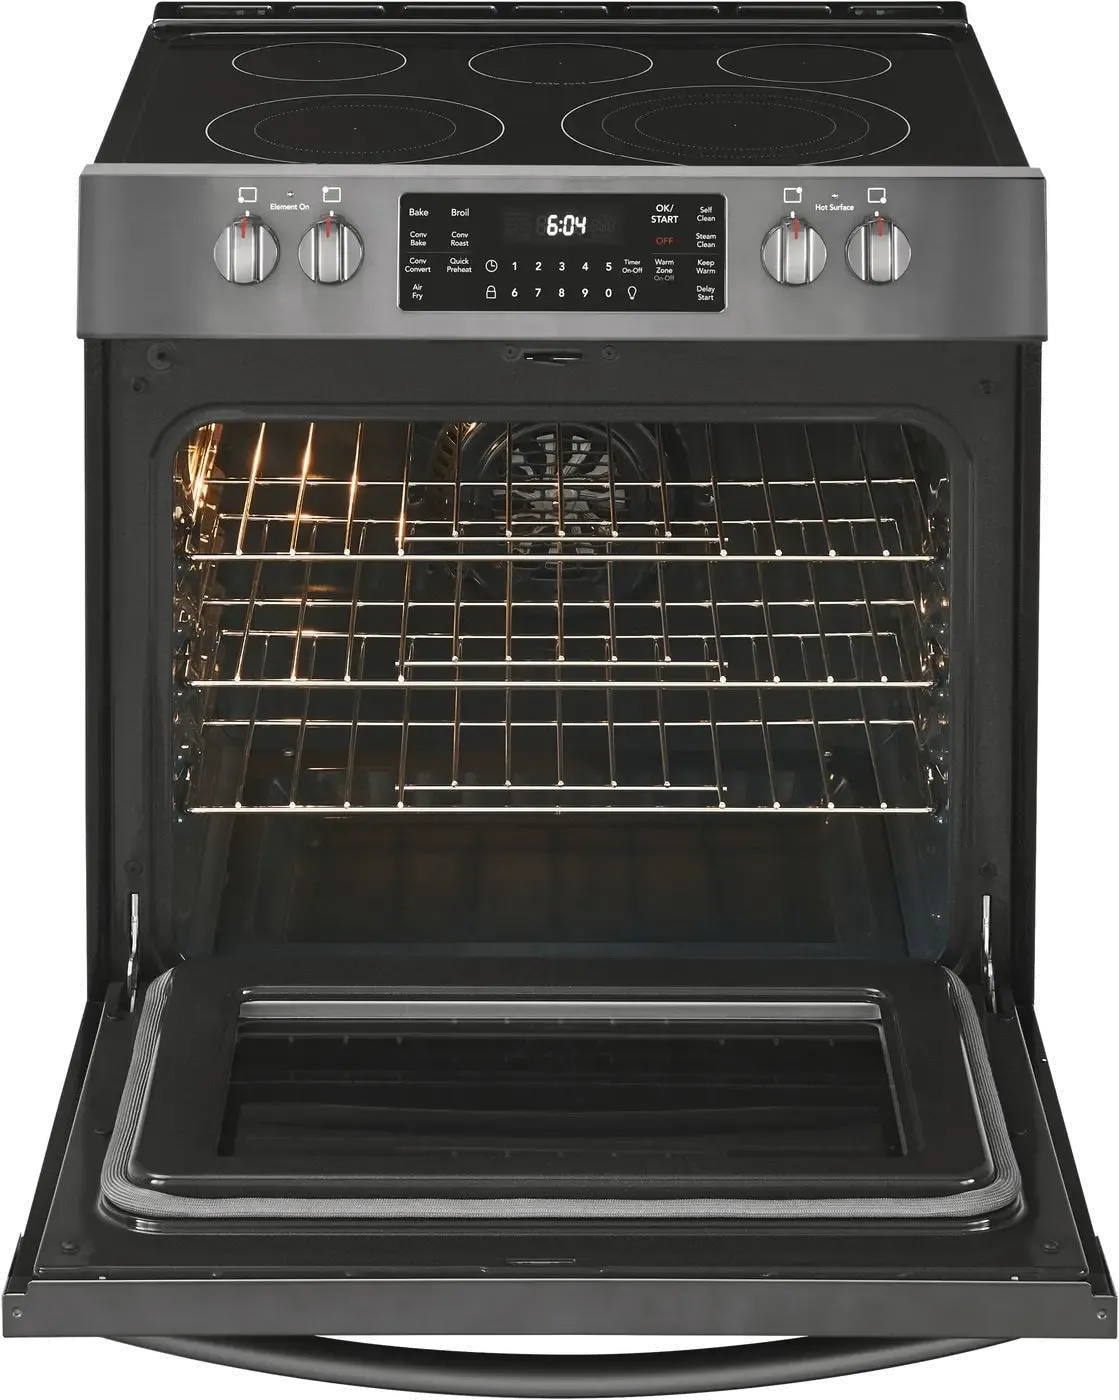 Frigidaire 30 Inch Electric Range with Air Fry - 5.4 cu. ft. Black Stainless Steel